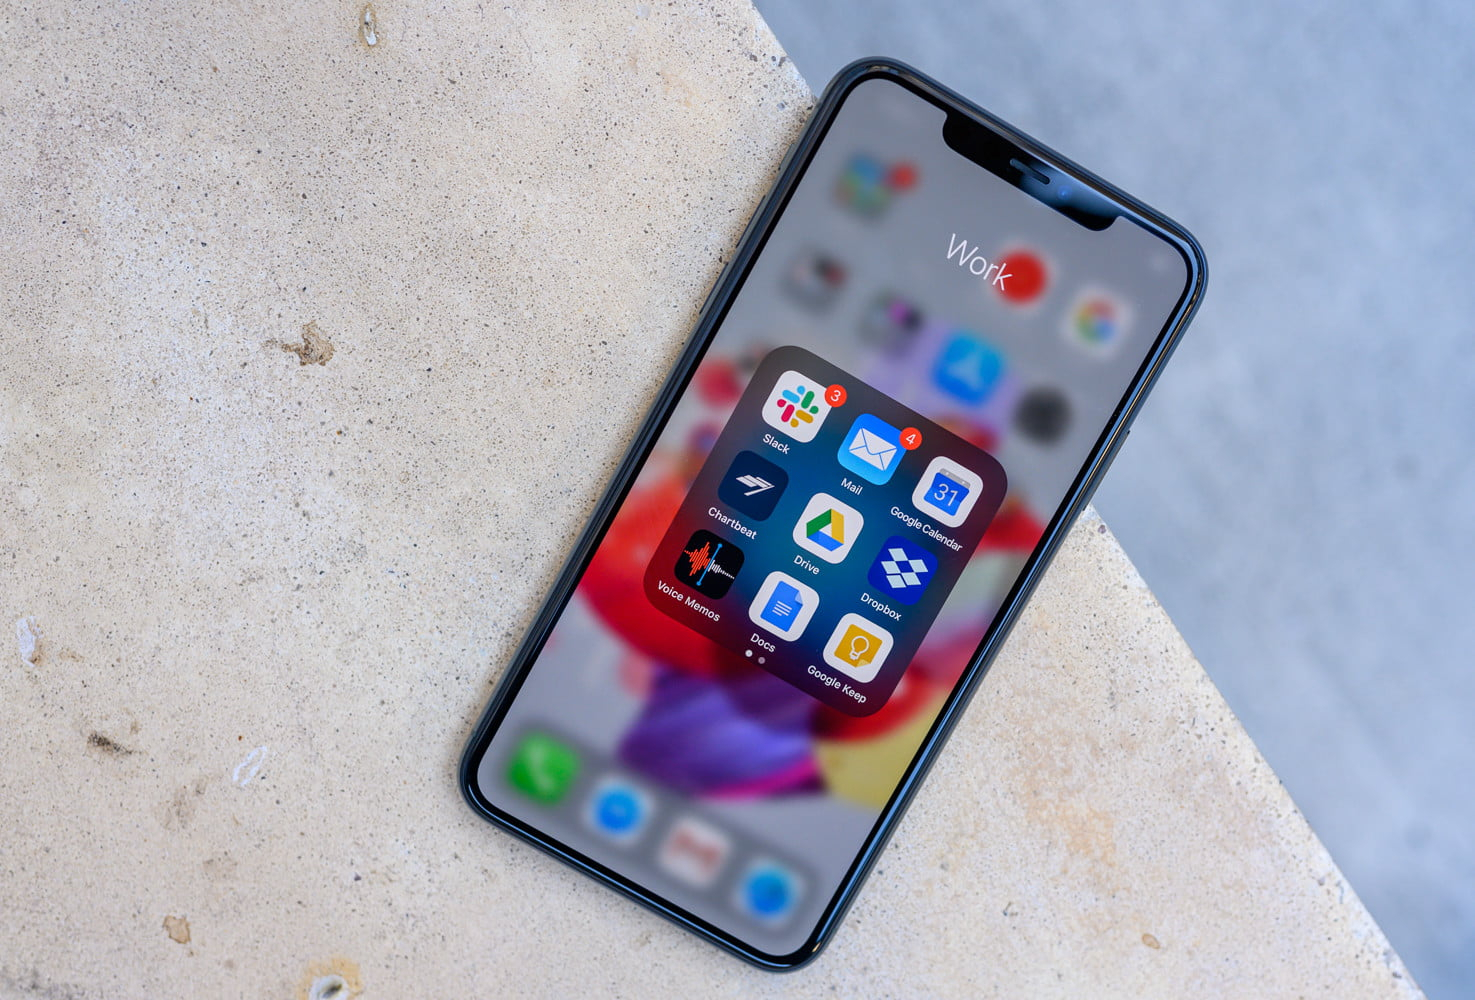 Common Ios 13 Problems And How To Fix Them | Digital Trends regarding Calendar Icon Missing On Iphone